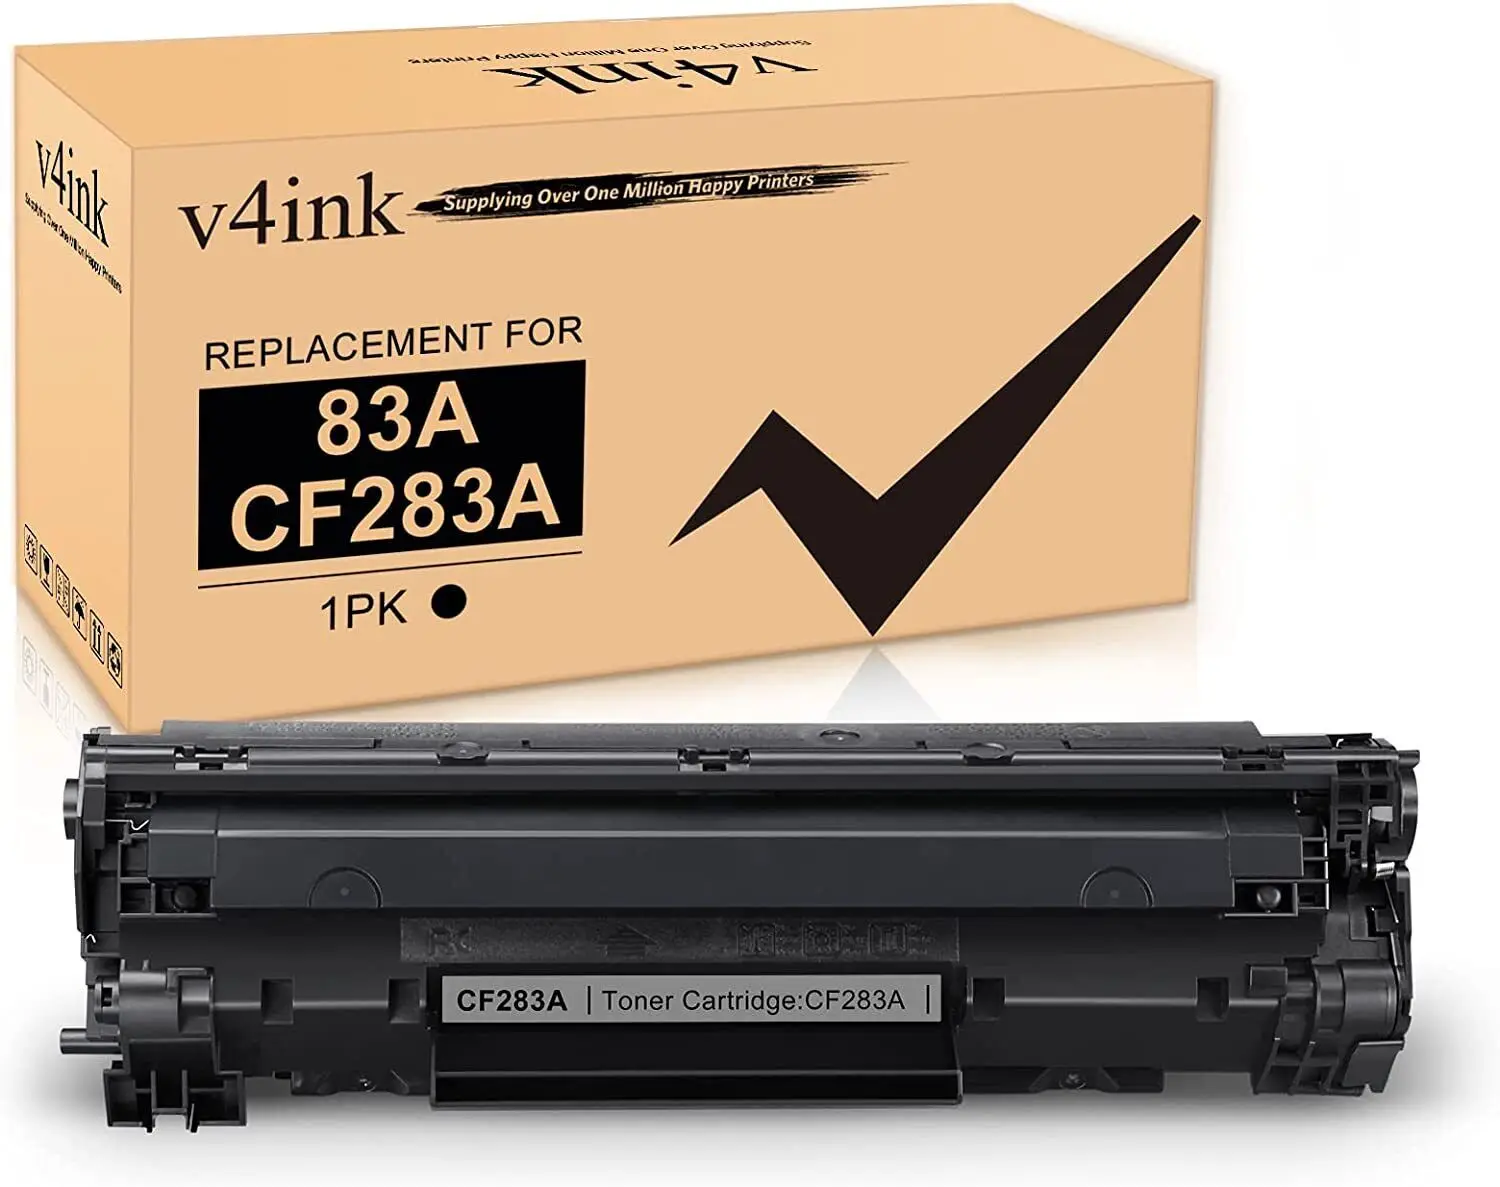 

1Pack V4INK CF283A 83A Toner Cartridge for HP MFP M127fw M127fn M125nw M201dw